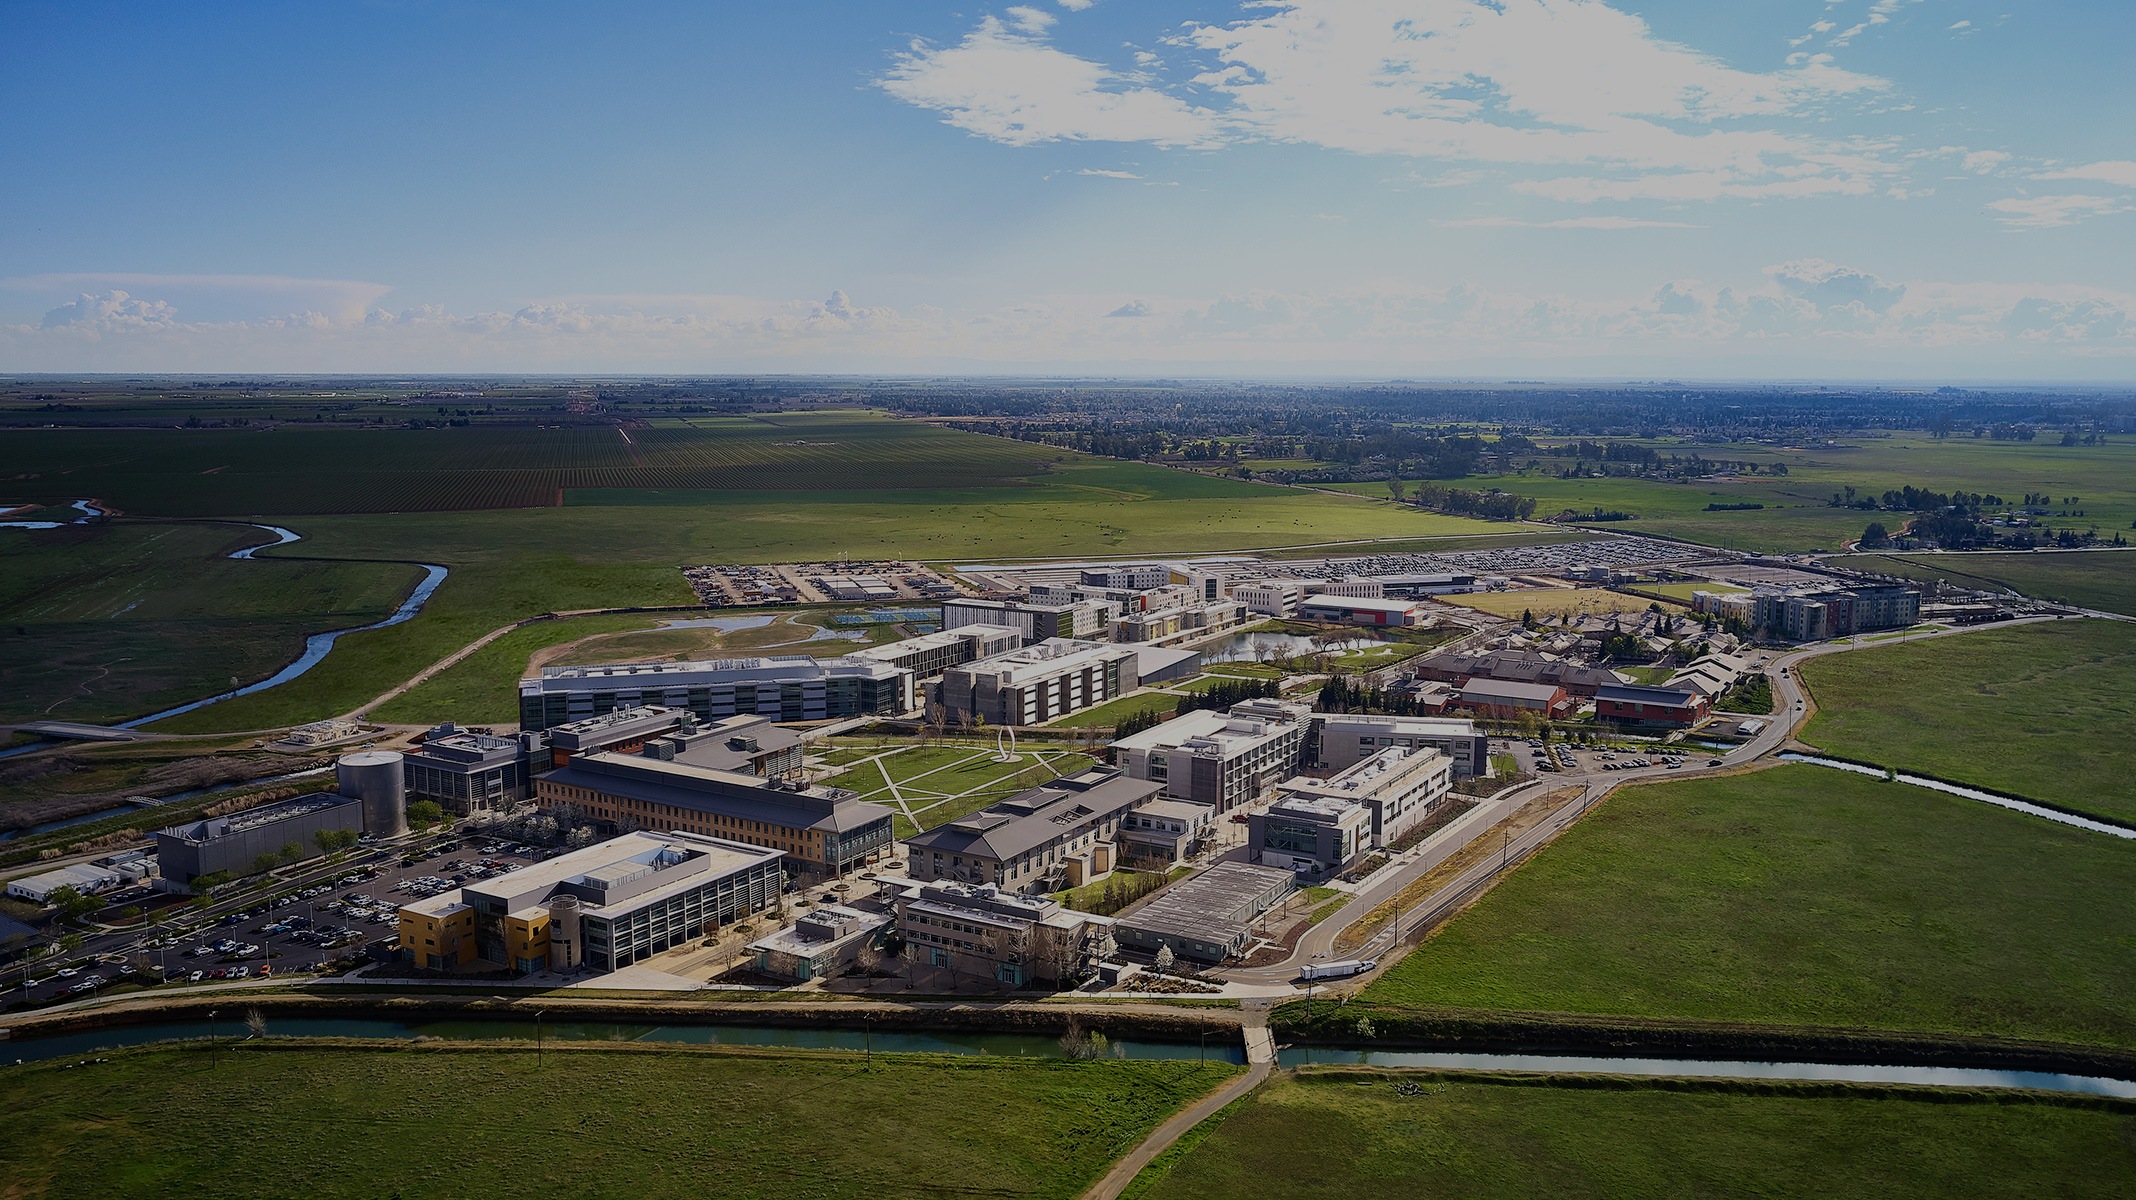 UC Merced 2020 Expansion